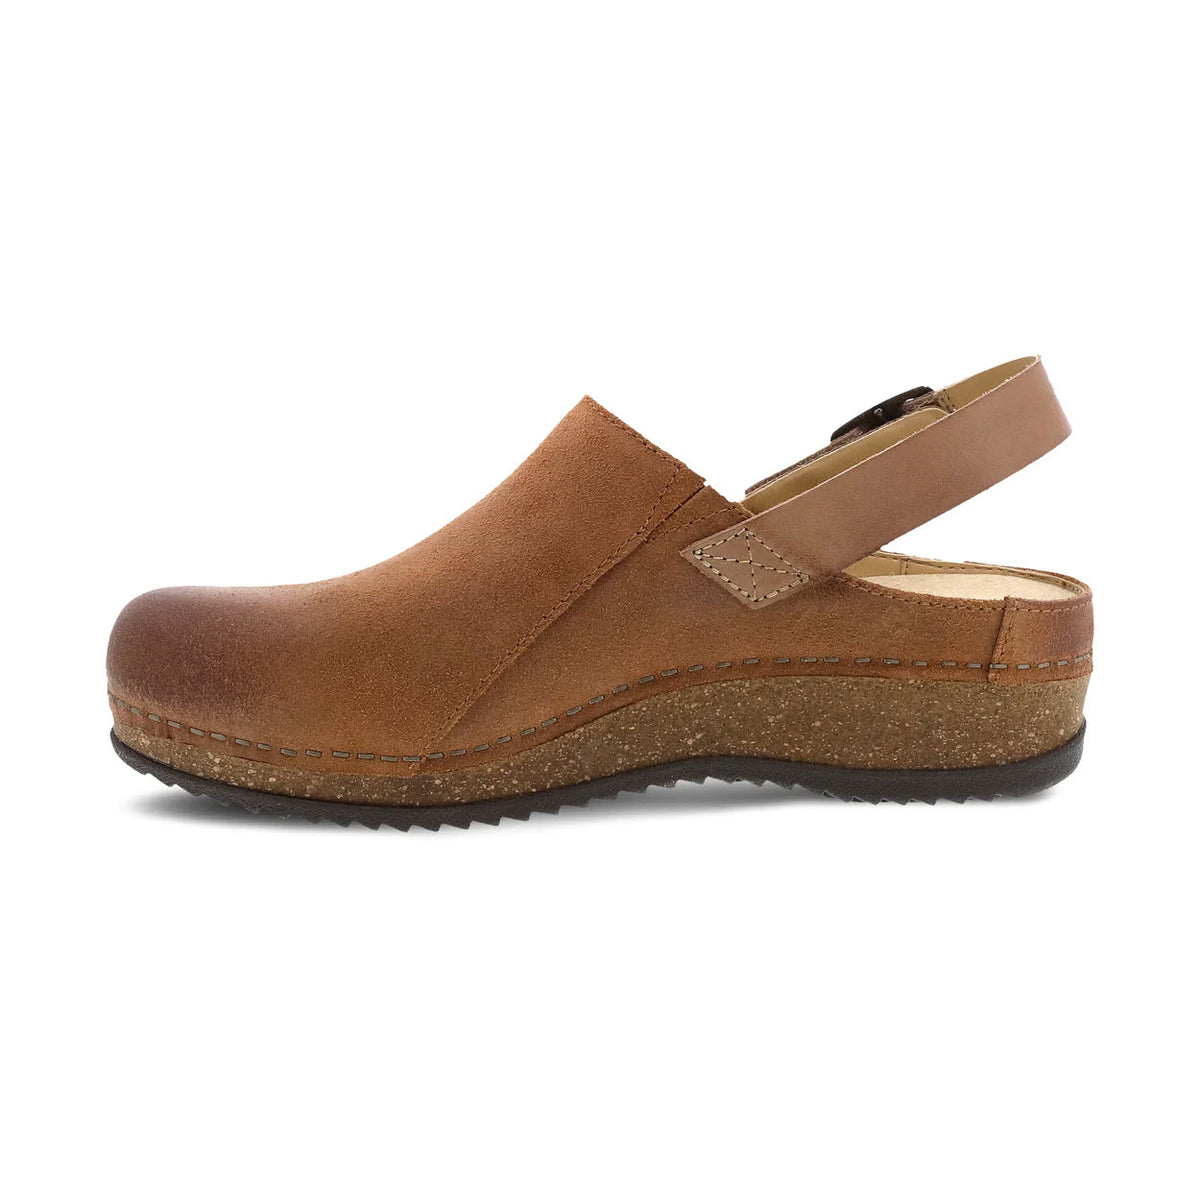 Side view of a DANSKO MERRIN TAN - WOMENS clog with an adjustable heel strap and a sustainable cork platform sole, isolated on a white background.